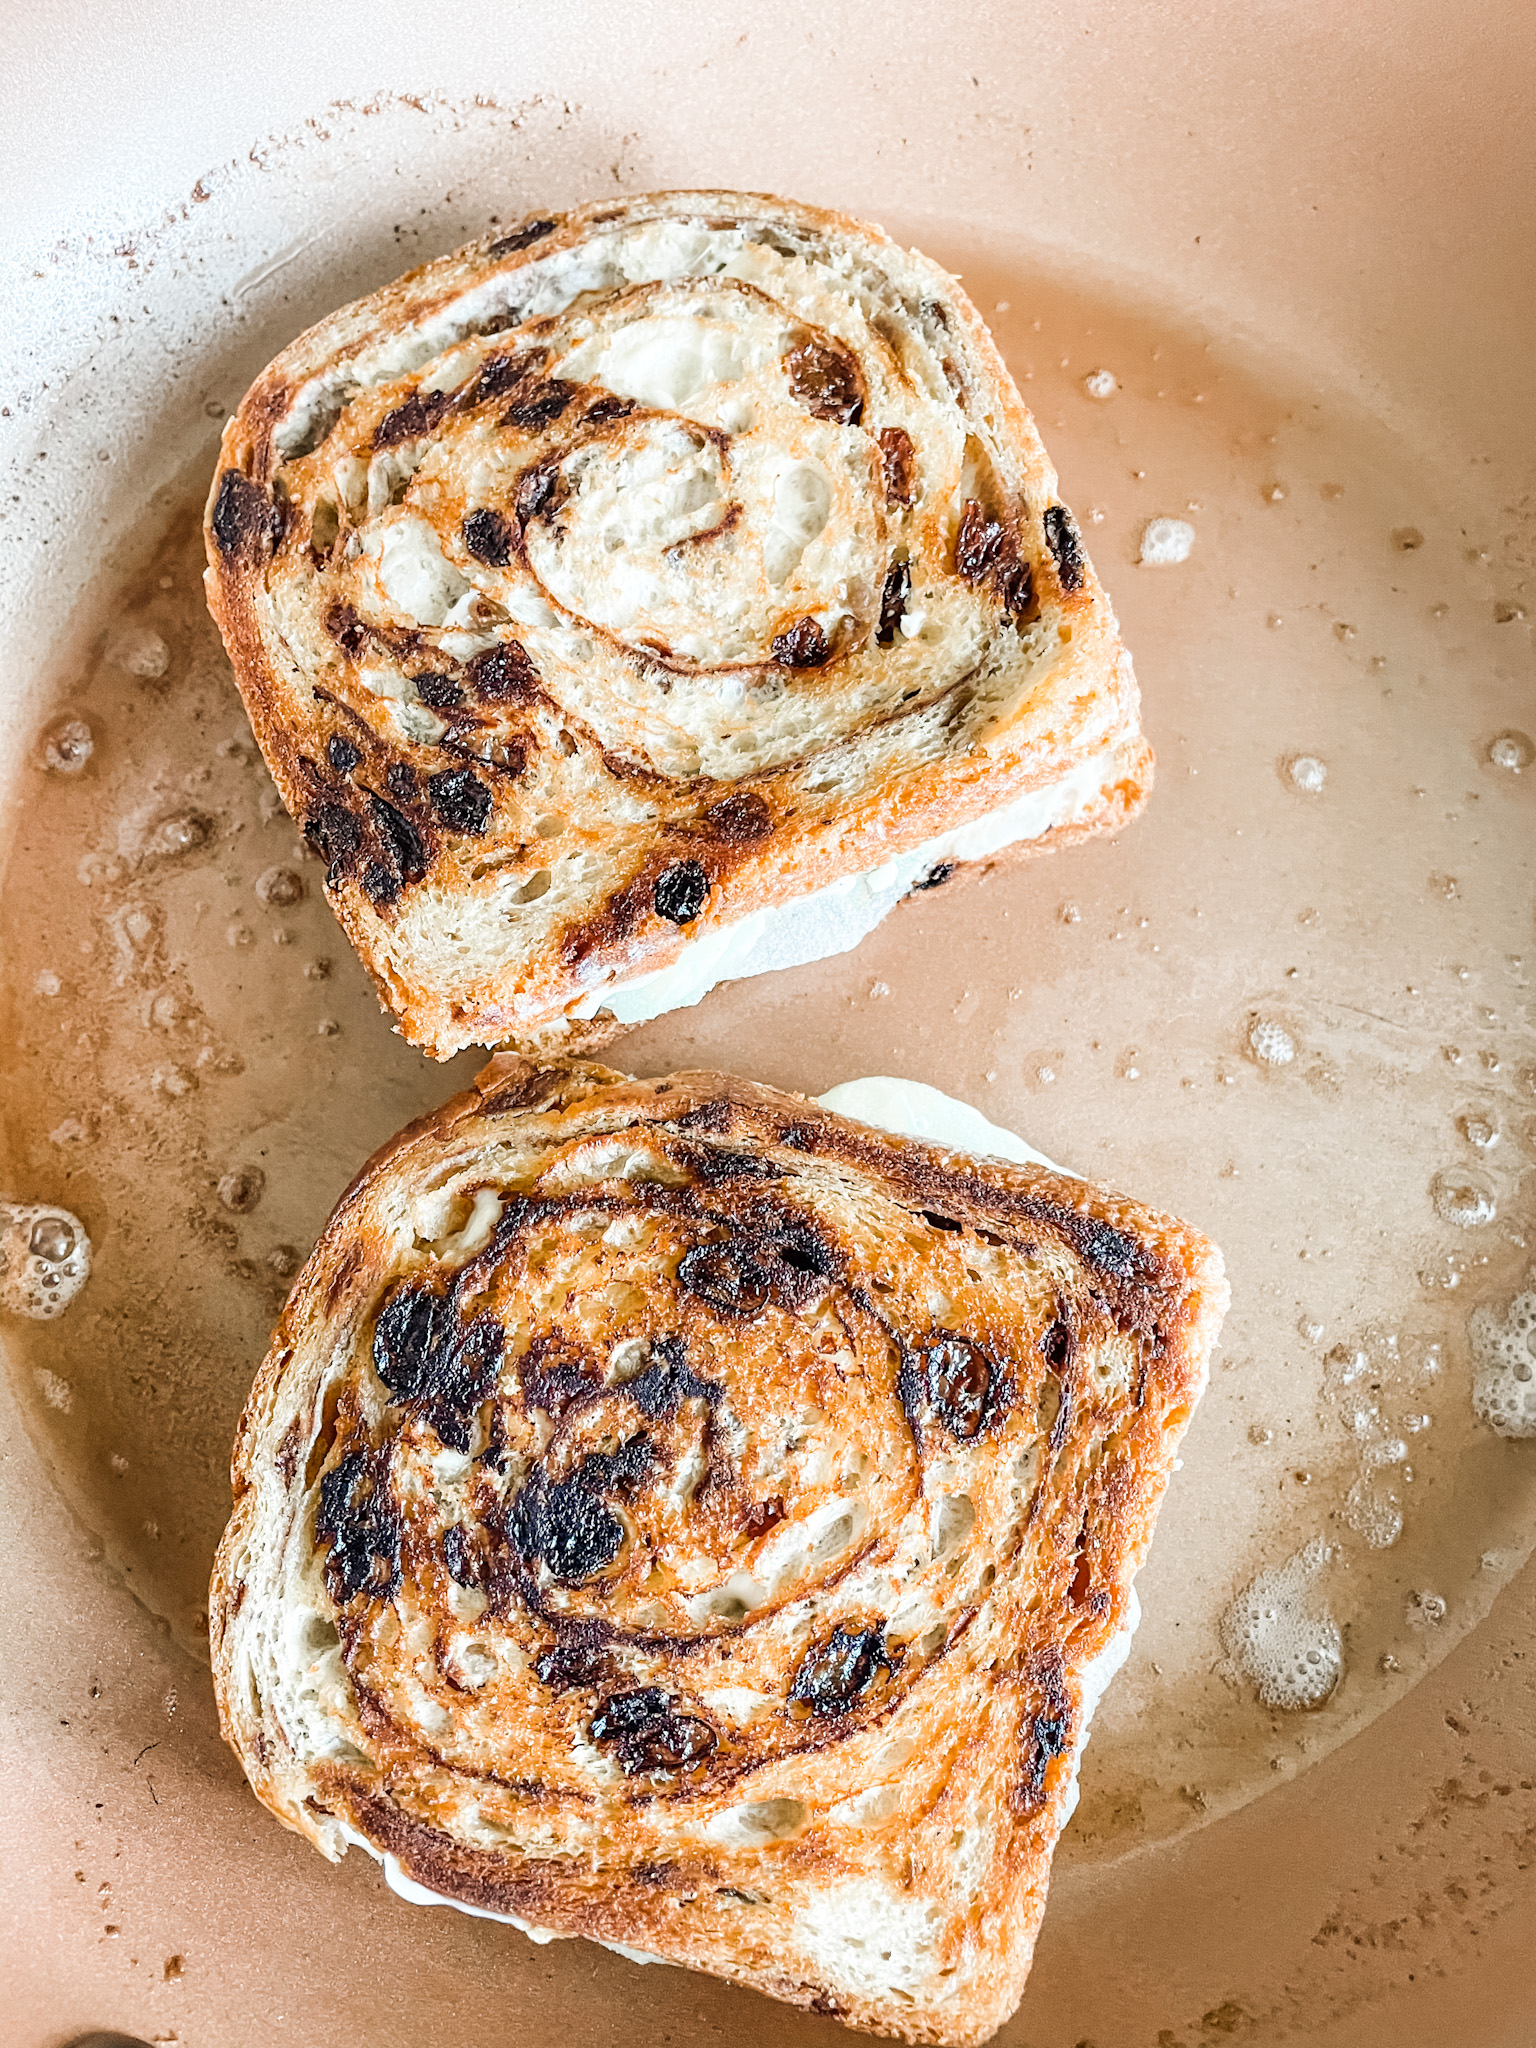 The Grilled Apple and Brie Cheese Sandwiches being toasted in a buttered pan